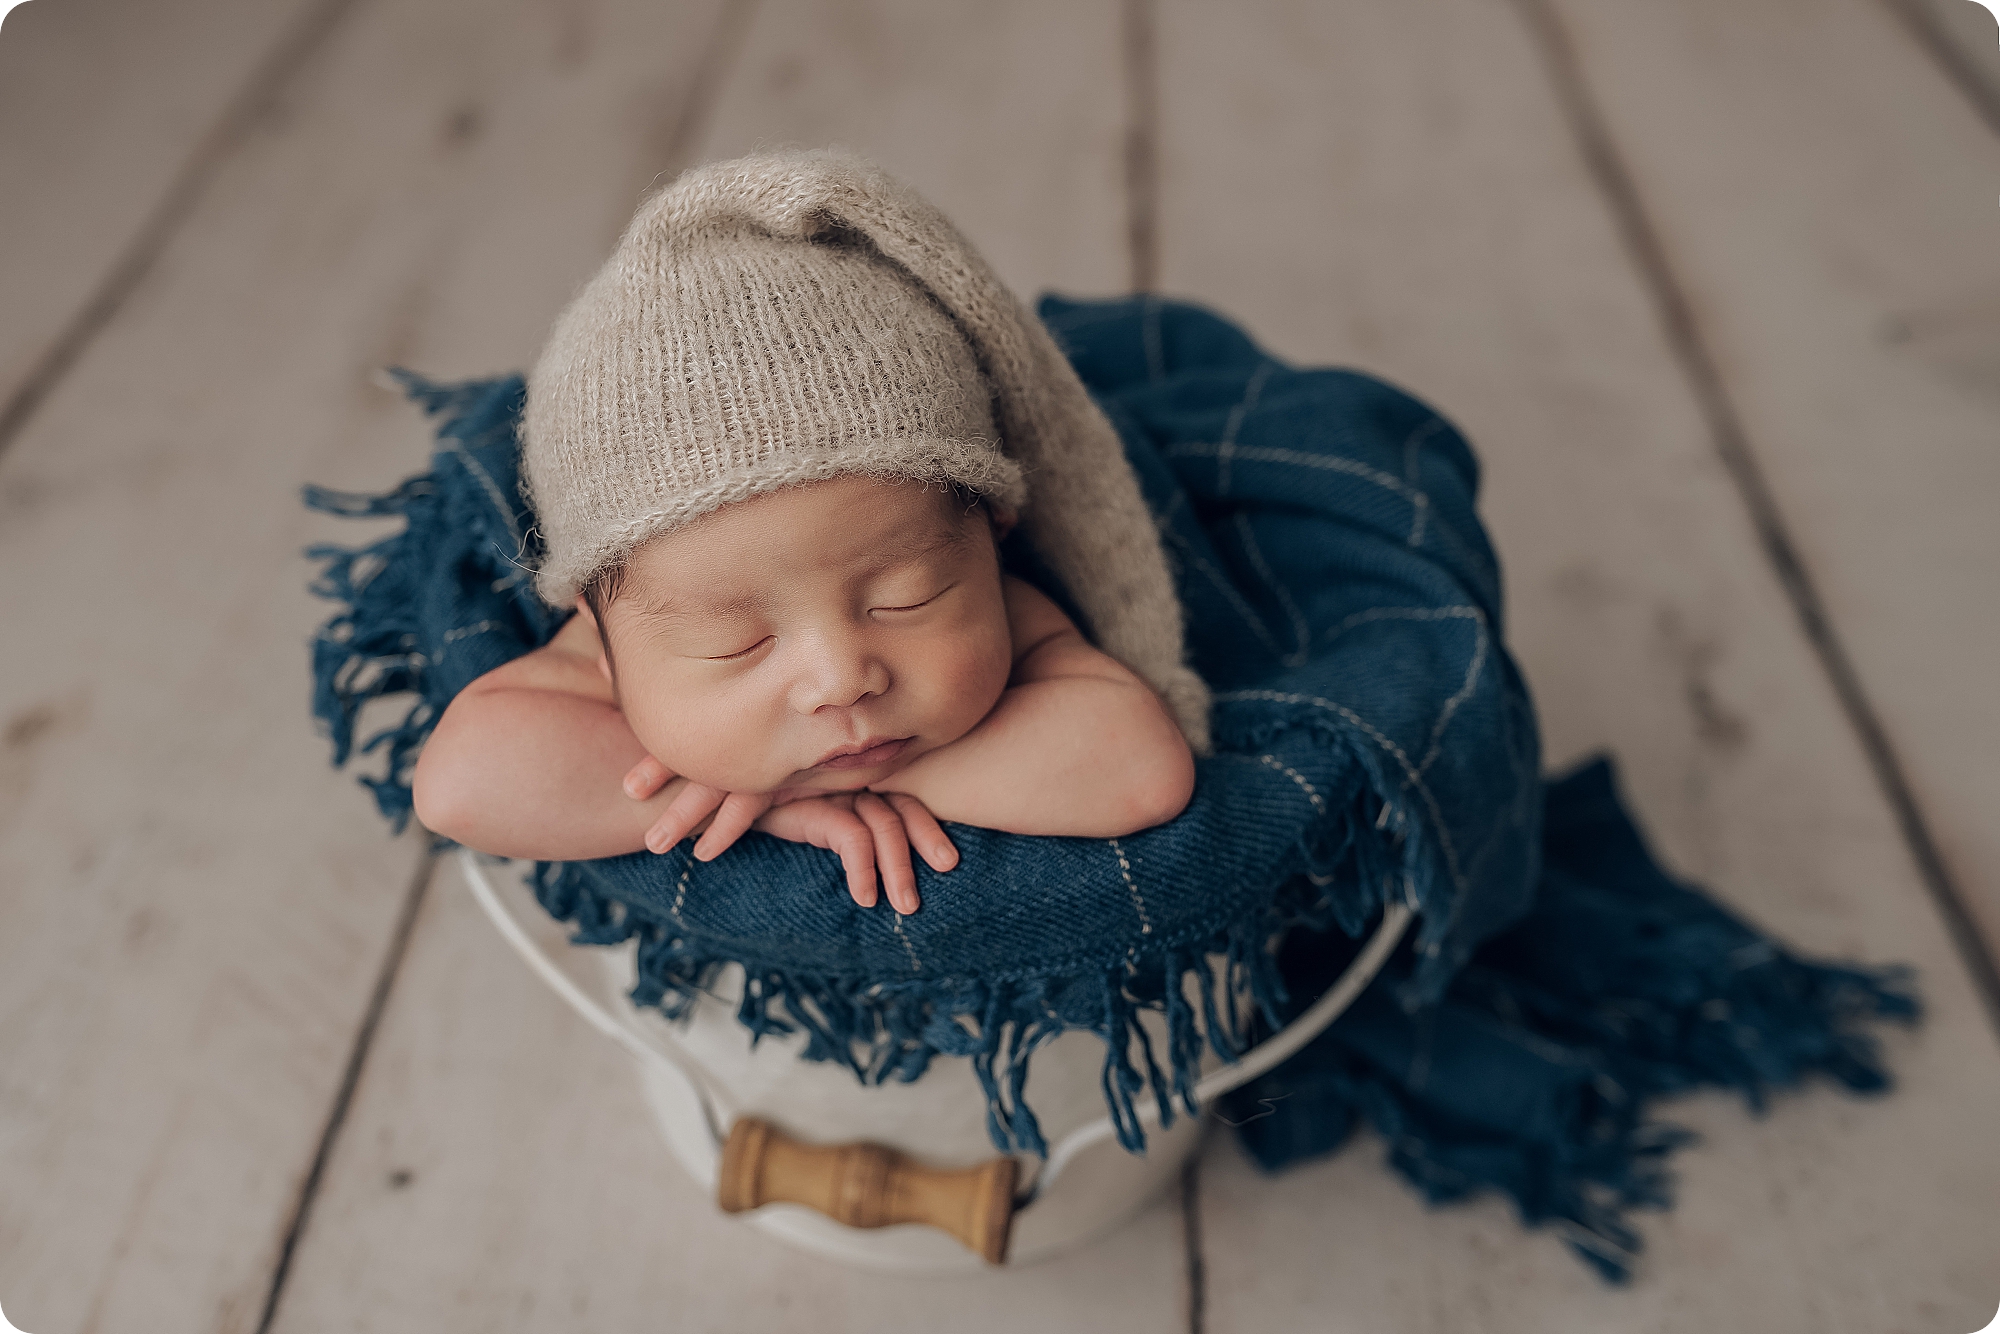 baby boy sleeps in basket on teal blanket during classic studio newborn session with Beka Price Photography